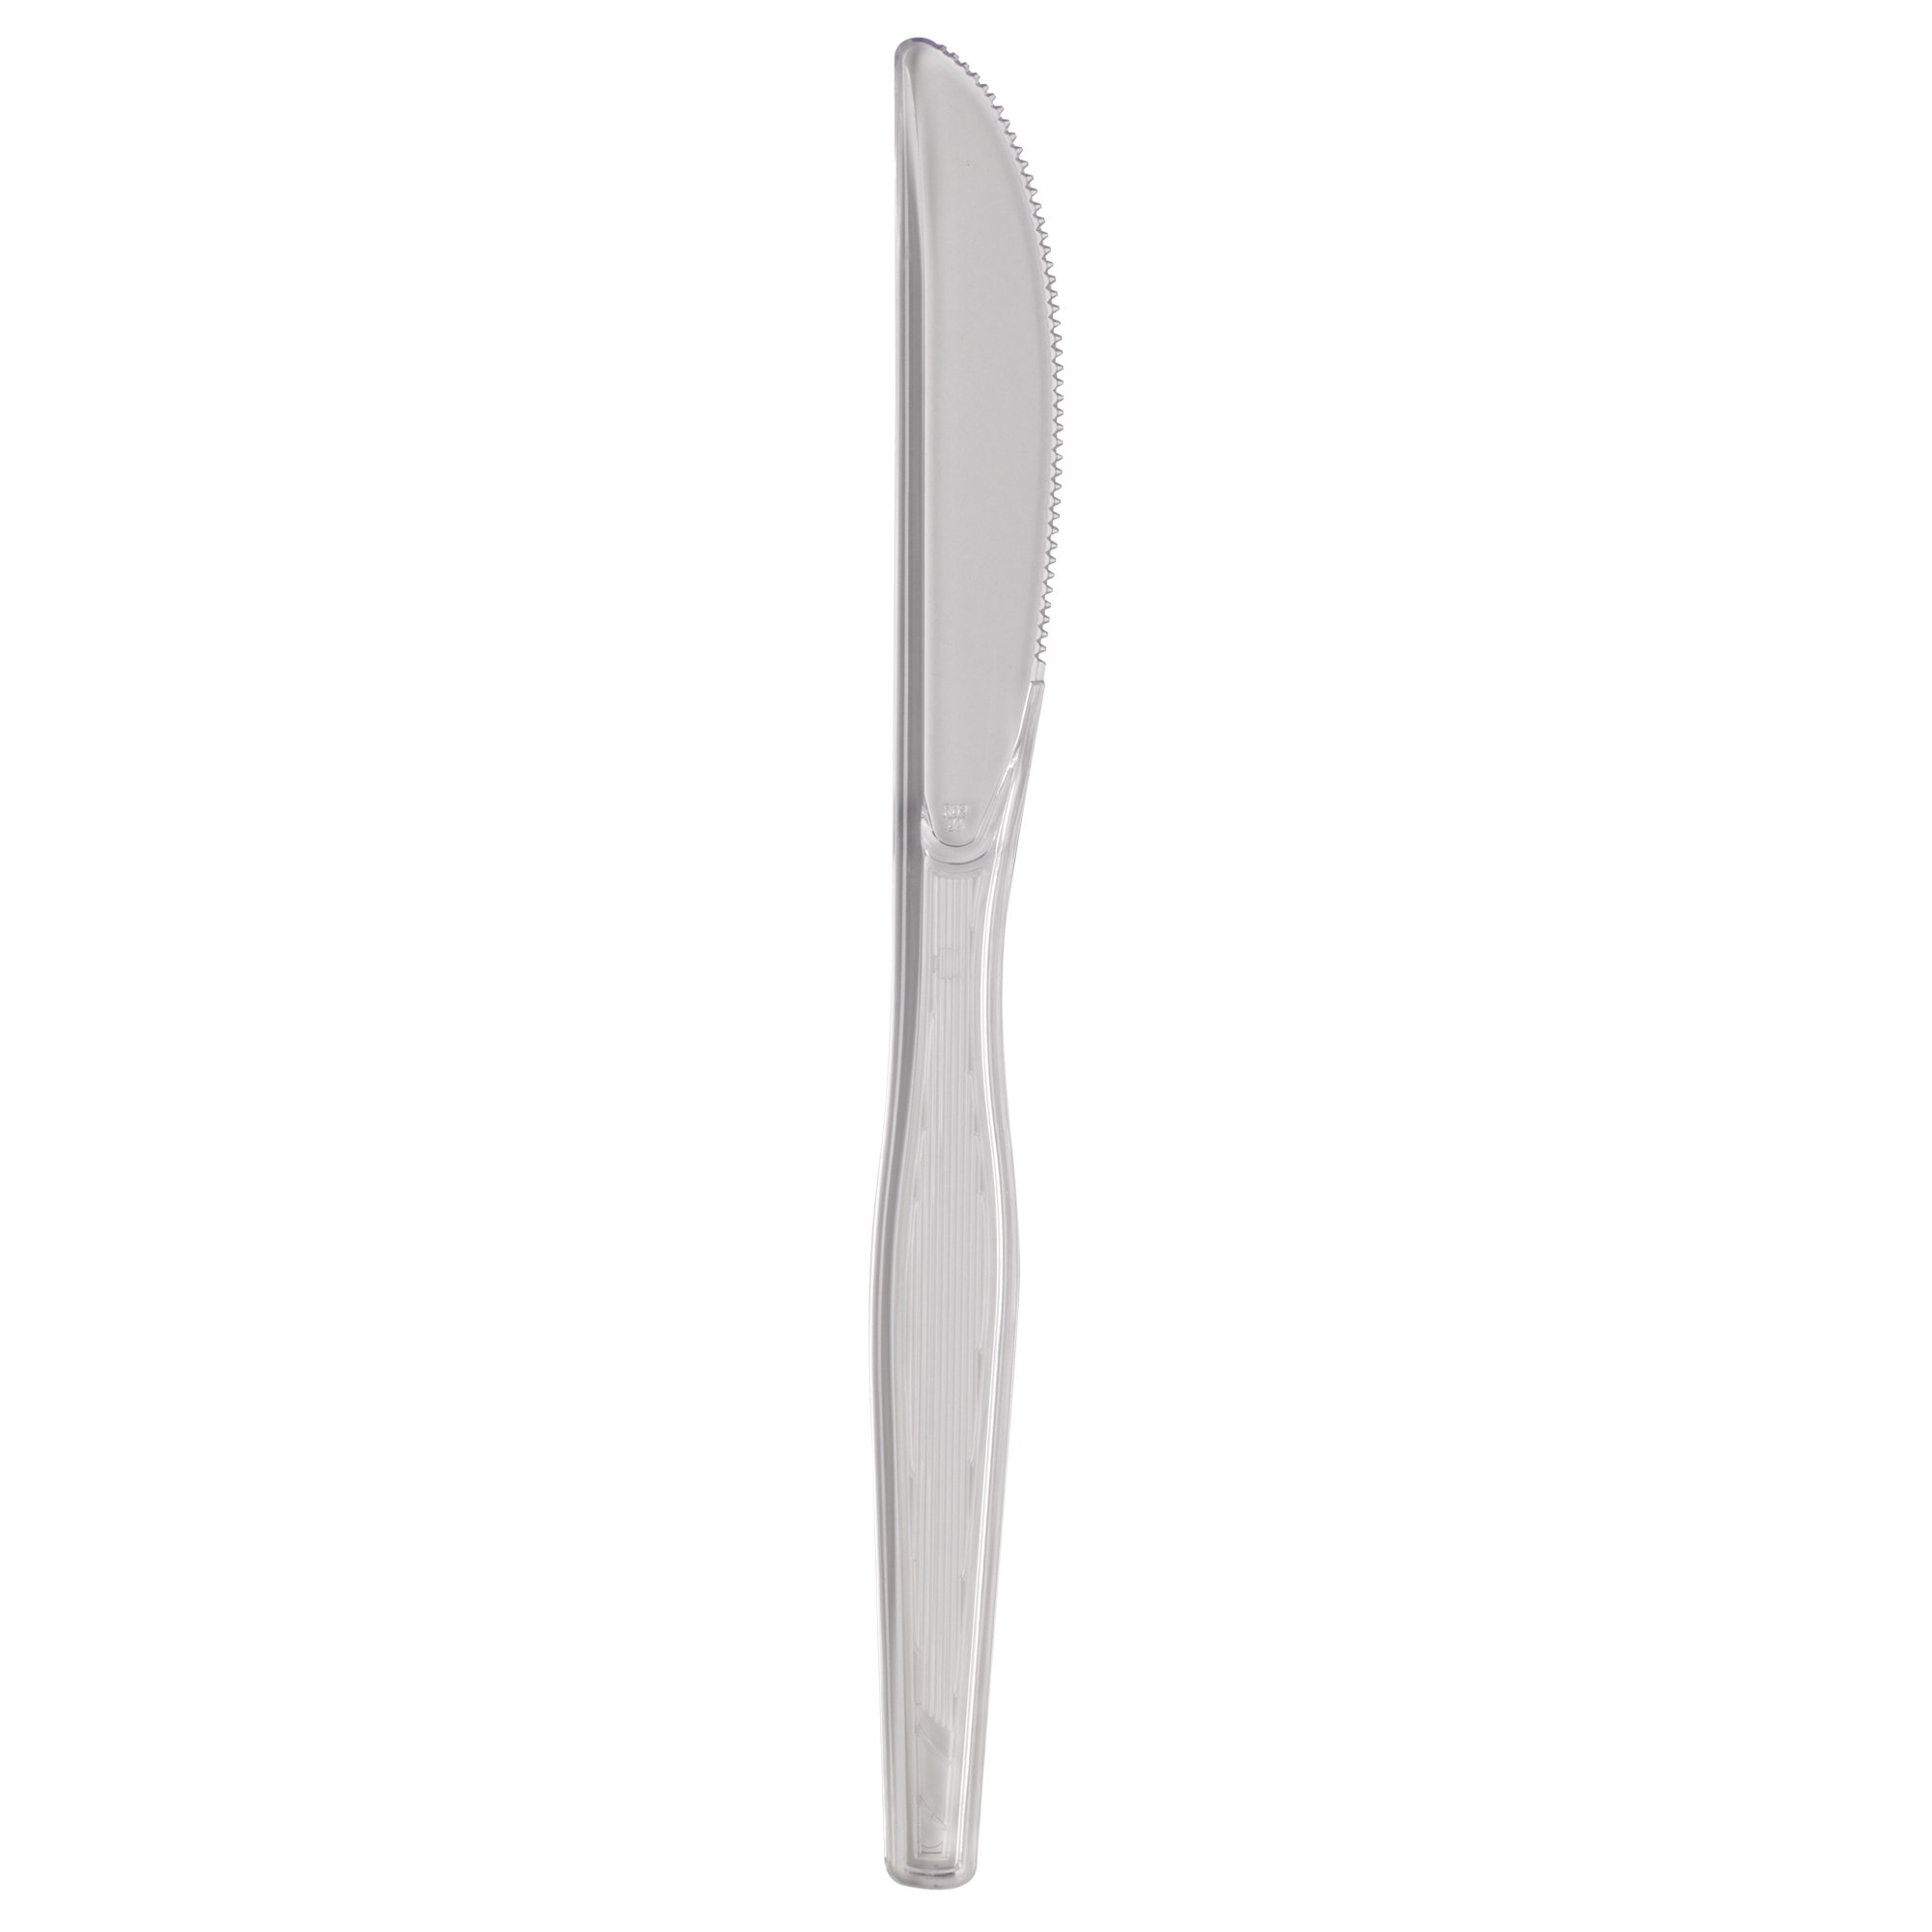 Dixie Plastic Cutlery Heavyweight Knives, White - 100 count